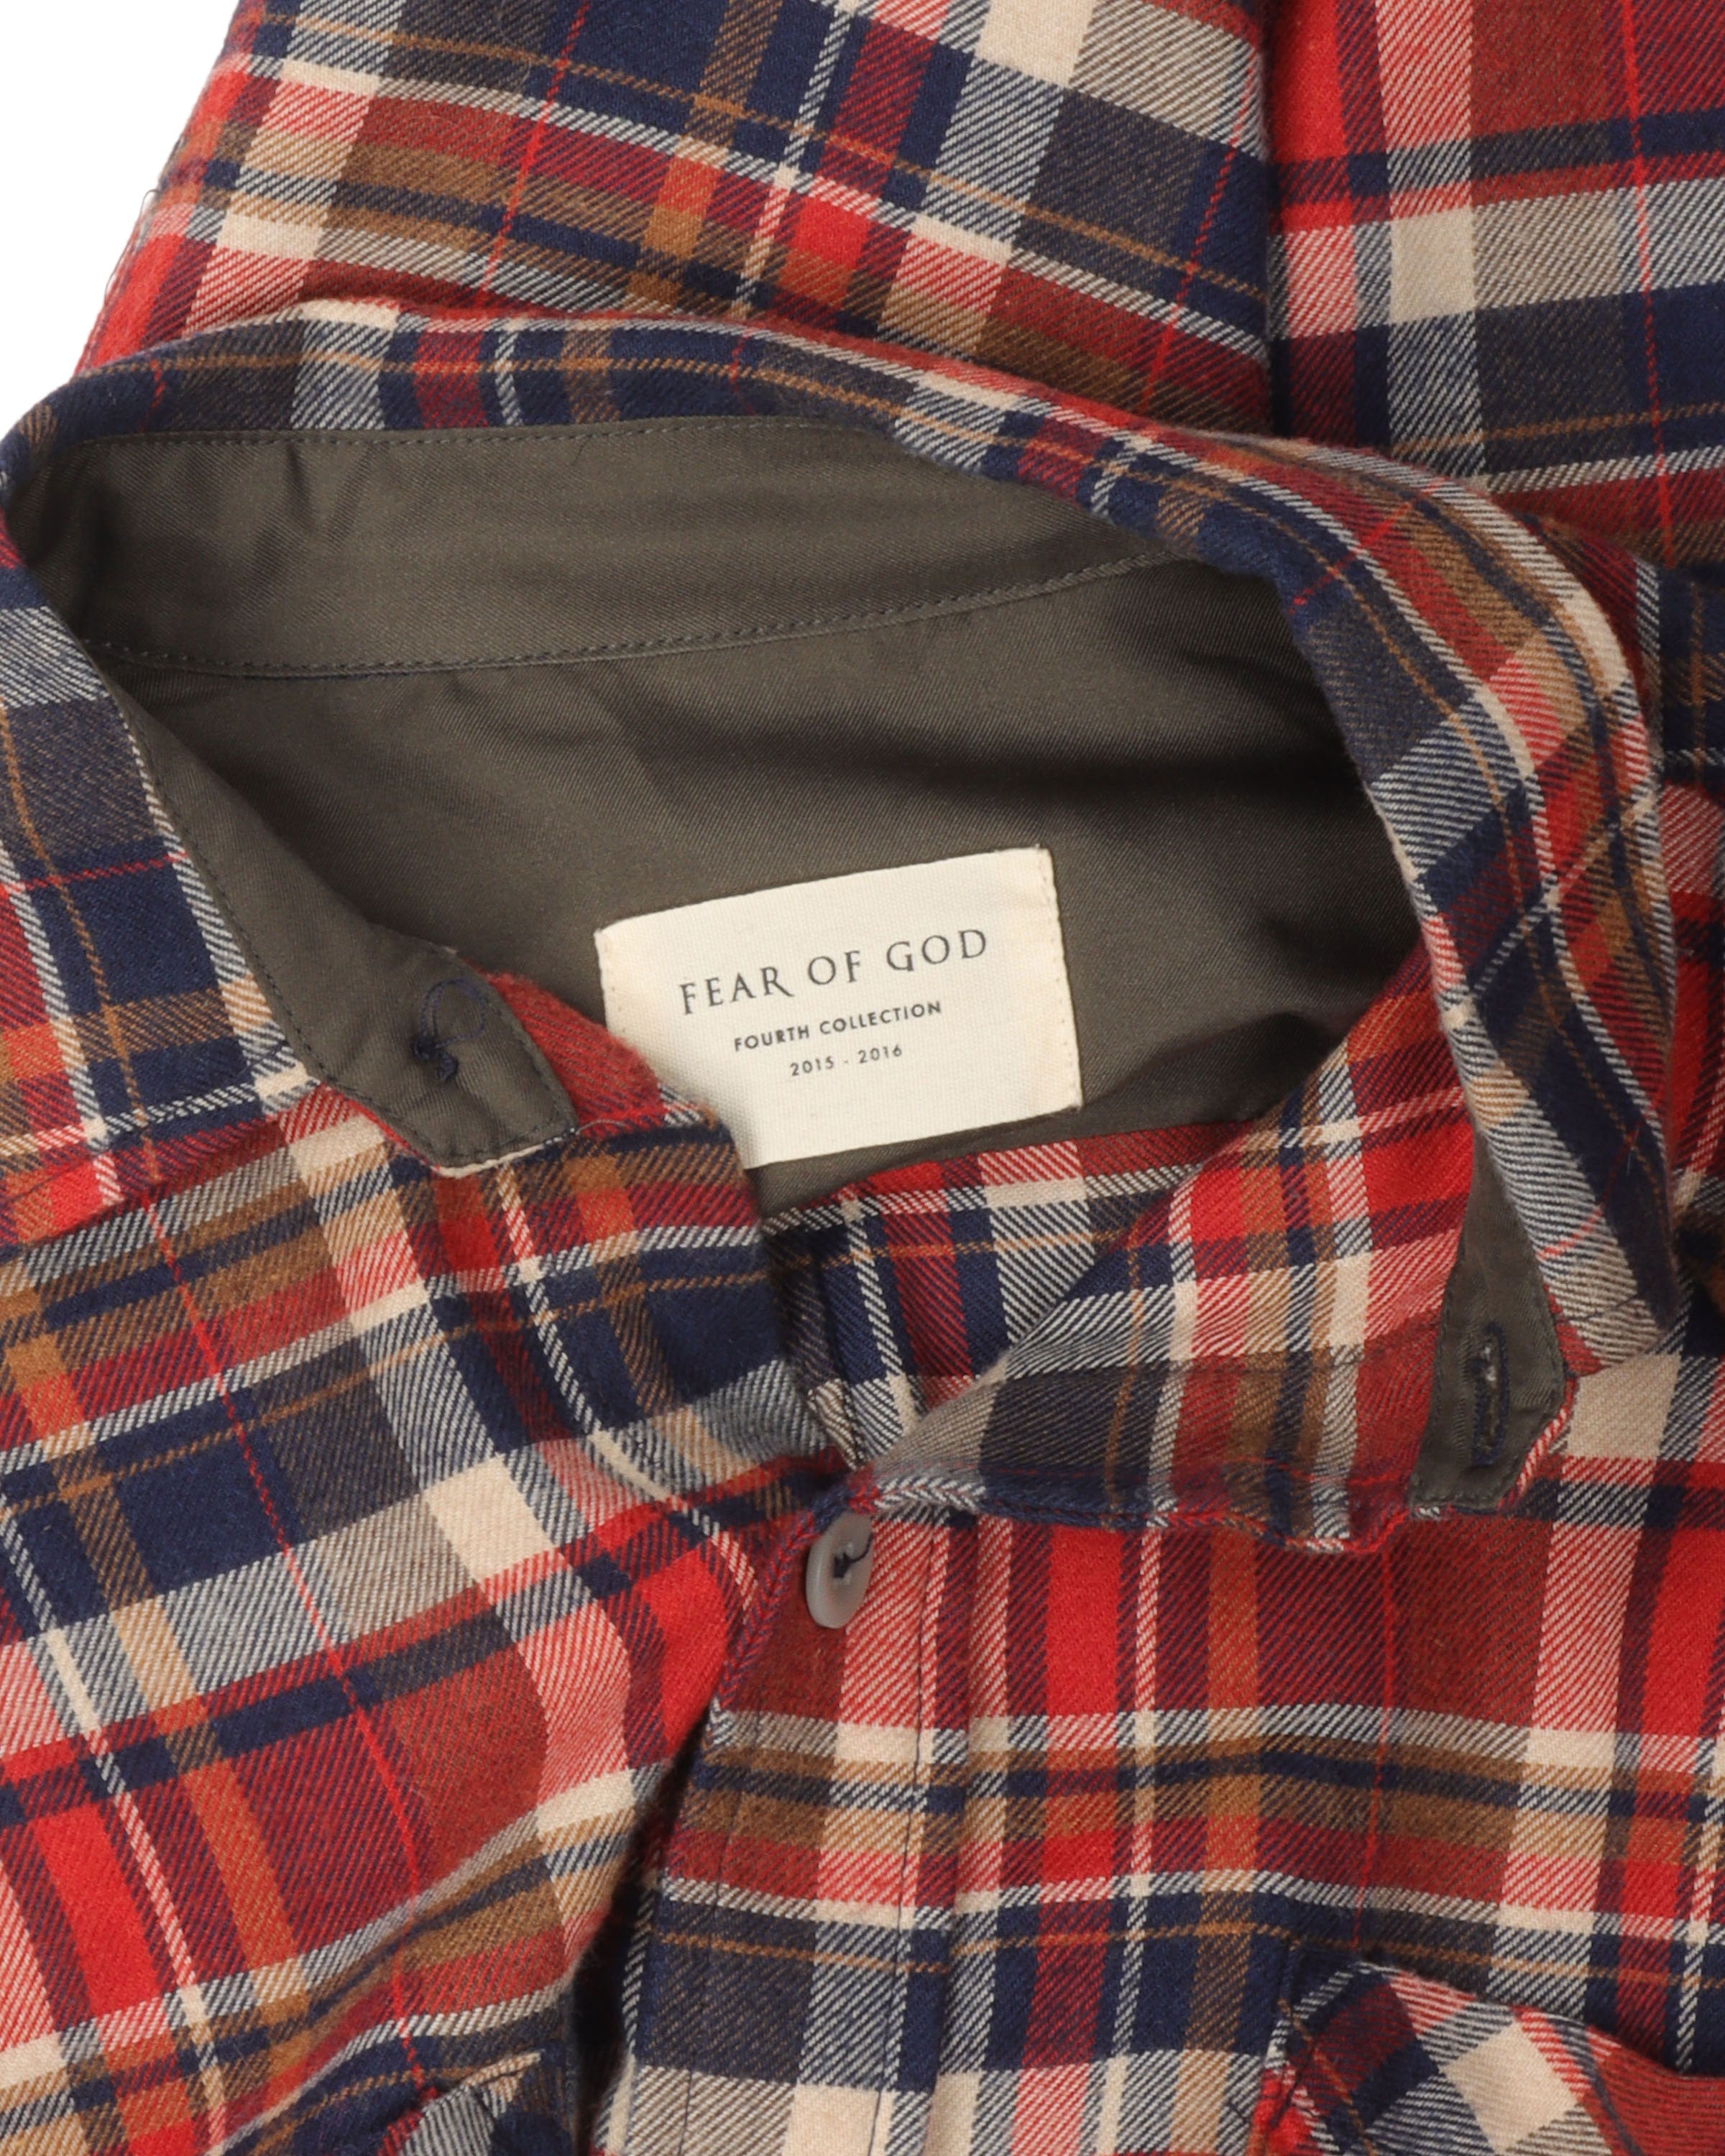 Fourth Collection Flannel Shirt